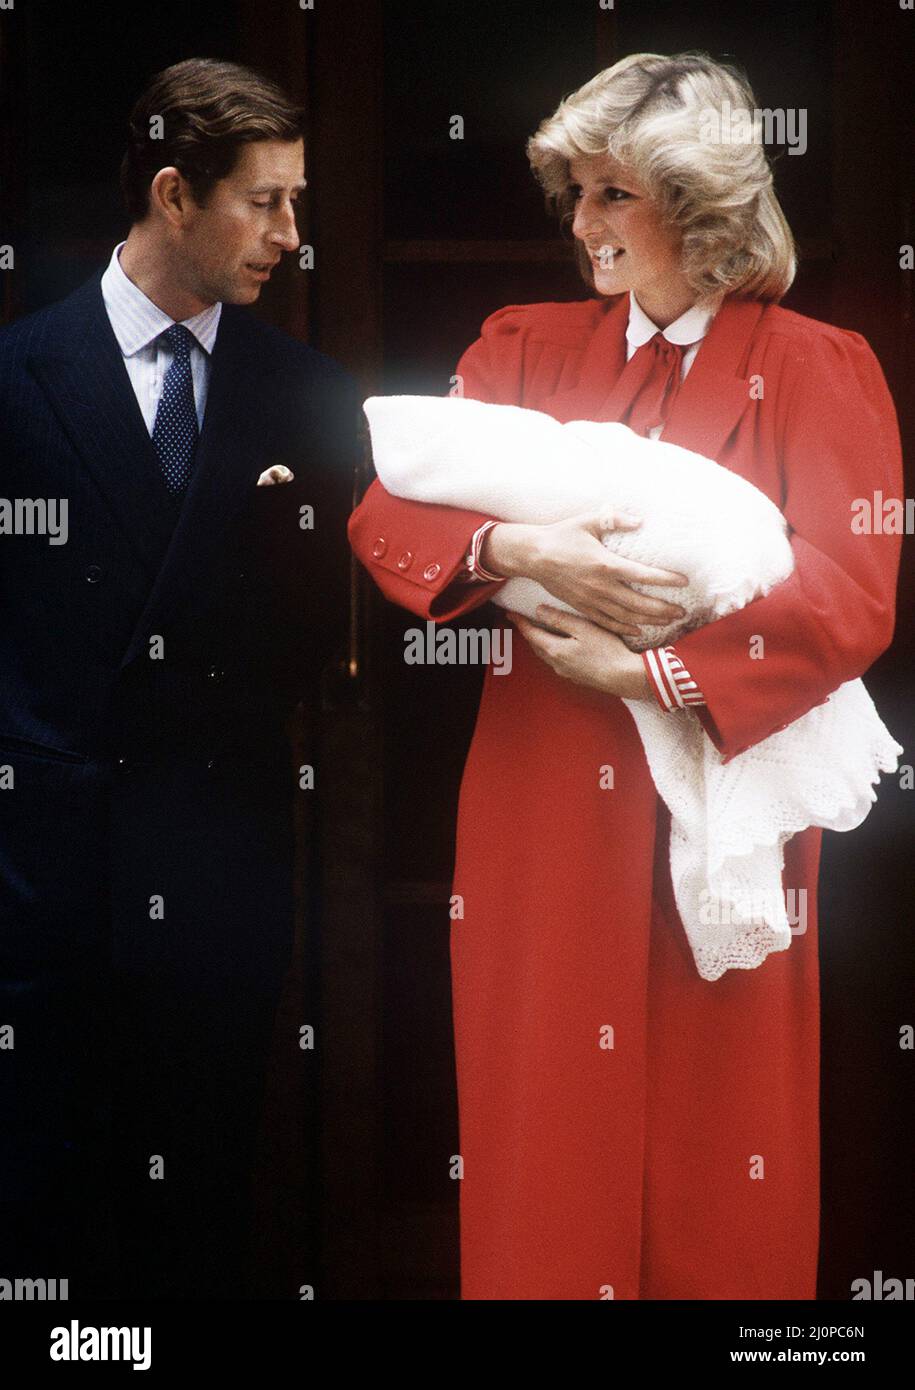 Princess Diana and Prince Charles leaving St Mary's Hospital, London with their newborn son, Prince Harry, 16th September 1984.  The Princess is wearing a red coat by Jan van Velden. Stock Photo